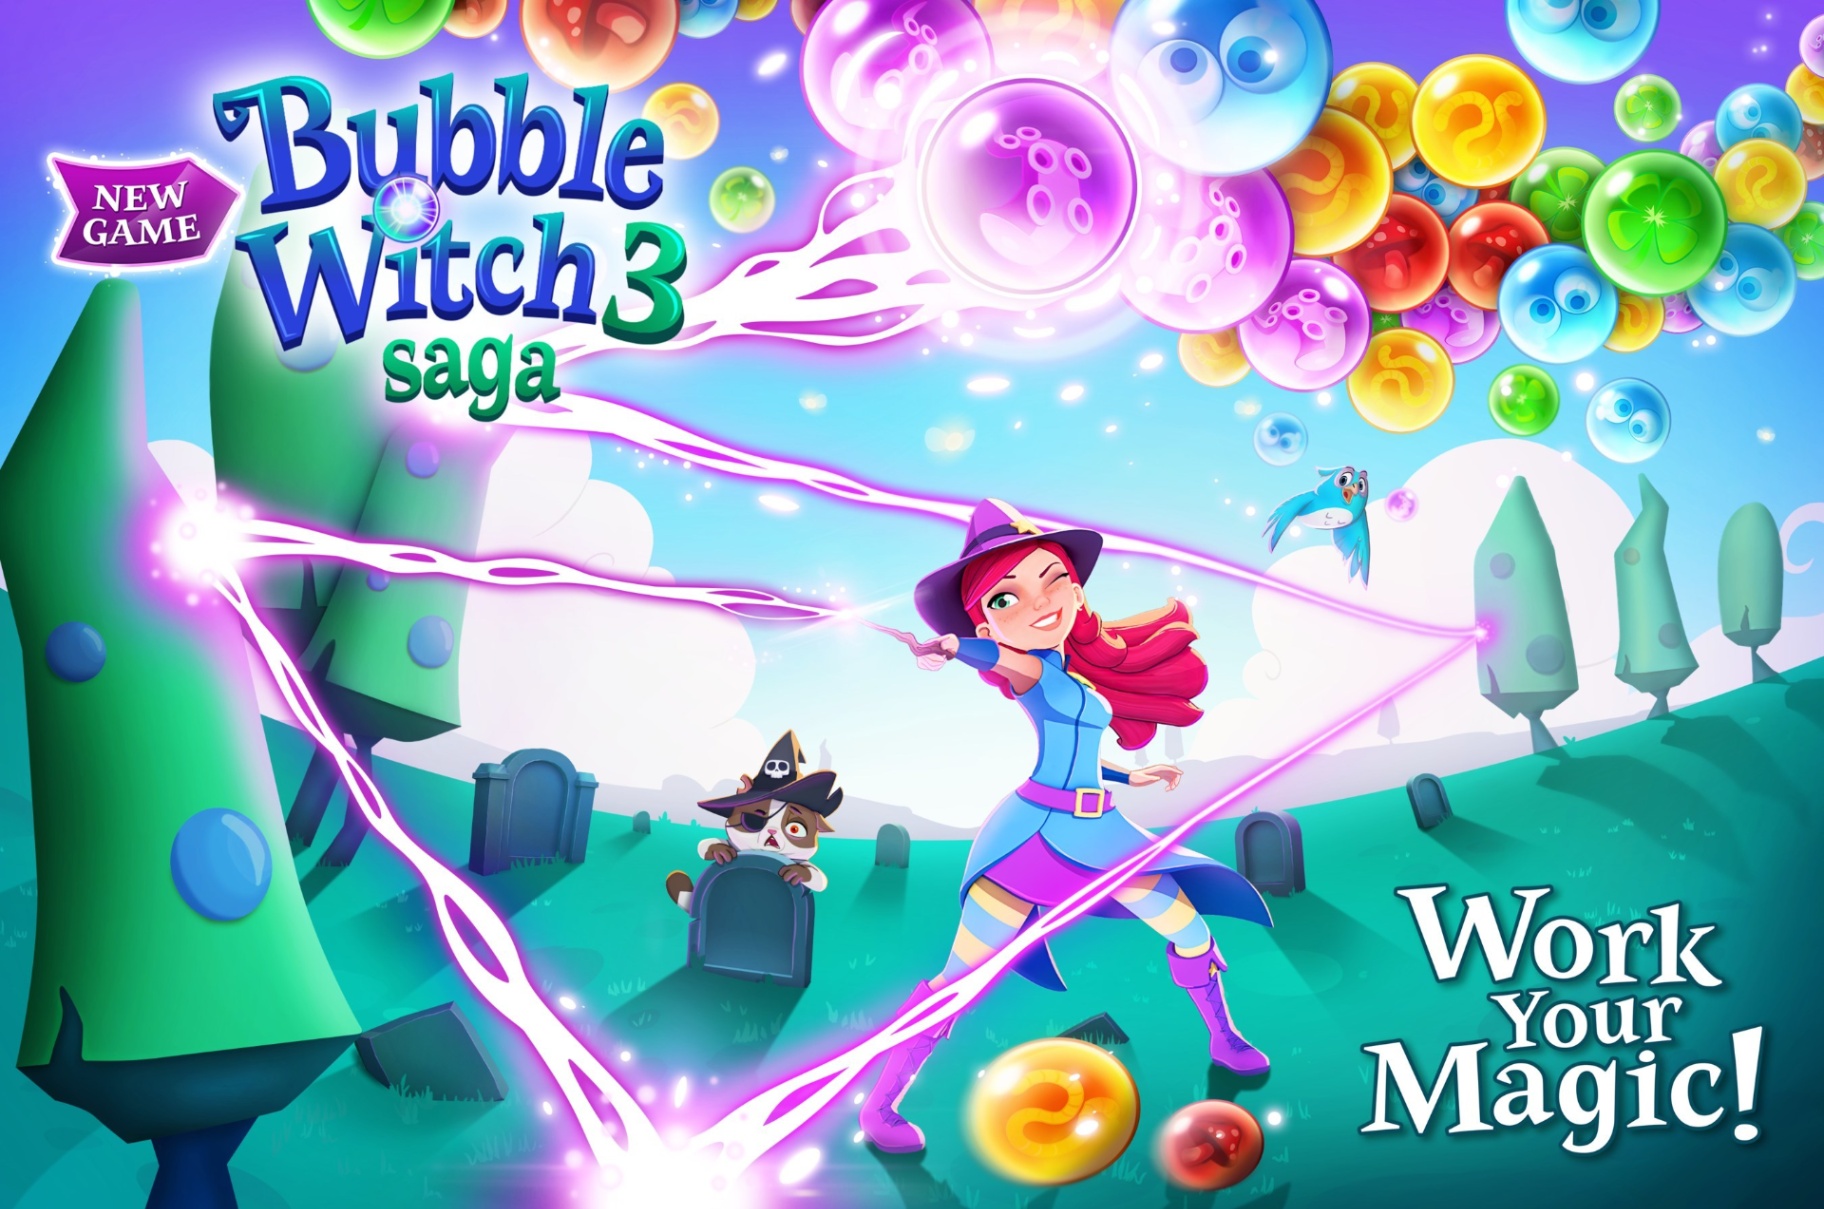 How Get Gold in Bubble Witch 3 Saga